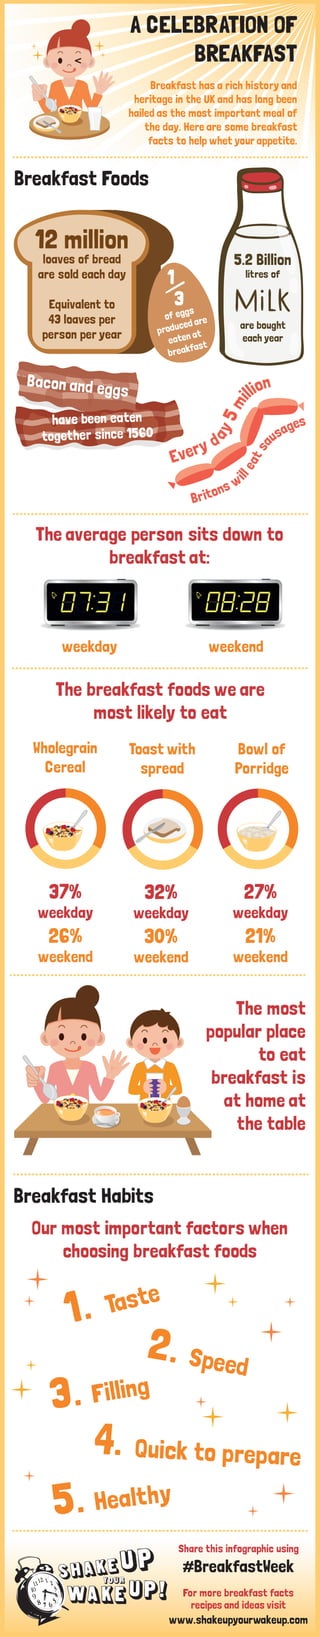 weekday weekend
The average person sits down to
breakfast at:
The breakfast foods we are
most likely to eat
37%
weekday
26%
weekend
32%
weekday
30%
weekend
27%
weekday
21%
weekend
The most
popular place
to eat
breakfast is
at home at
the table
Share this infographic using
#BreakfastWeek
For more breakfast facts
recipes and ideas visit
www.shakeupyourwakeup.com
A CELEBRATION OF
BREAKFAST
Breakfast has a rich history and
heritage in the UK and has long been
hailed as the most important meal of
the day. Here are some breakfast
facts to help whet your appetite.
12 million
loaves of bread
are sold each day
Equivalent to
43 loaves per
person per year
5.2 Billion
litres of
are bought
each year
Bacon and eggs
have been eaten
together since 1560
Every d
ay5mi
llion
Britons wi
lleatsa
usages
Breakfast Foods
of eggs
produced are
eaten at
breakfast
Wholegrain
Cereal
Toast with
spread
Bowl of
Porridge
Breakfast Habits
Our most important factors when
choosing breakfast foods
Taste
Speed
Filling
Healthy
Quick to prepare
 